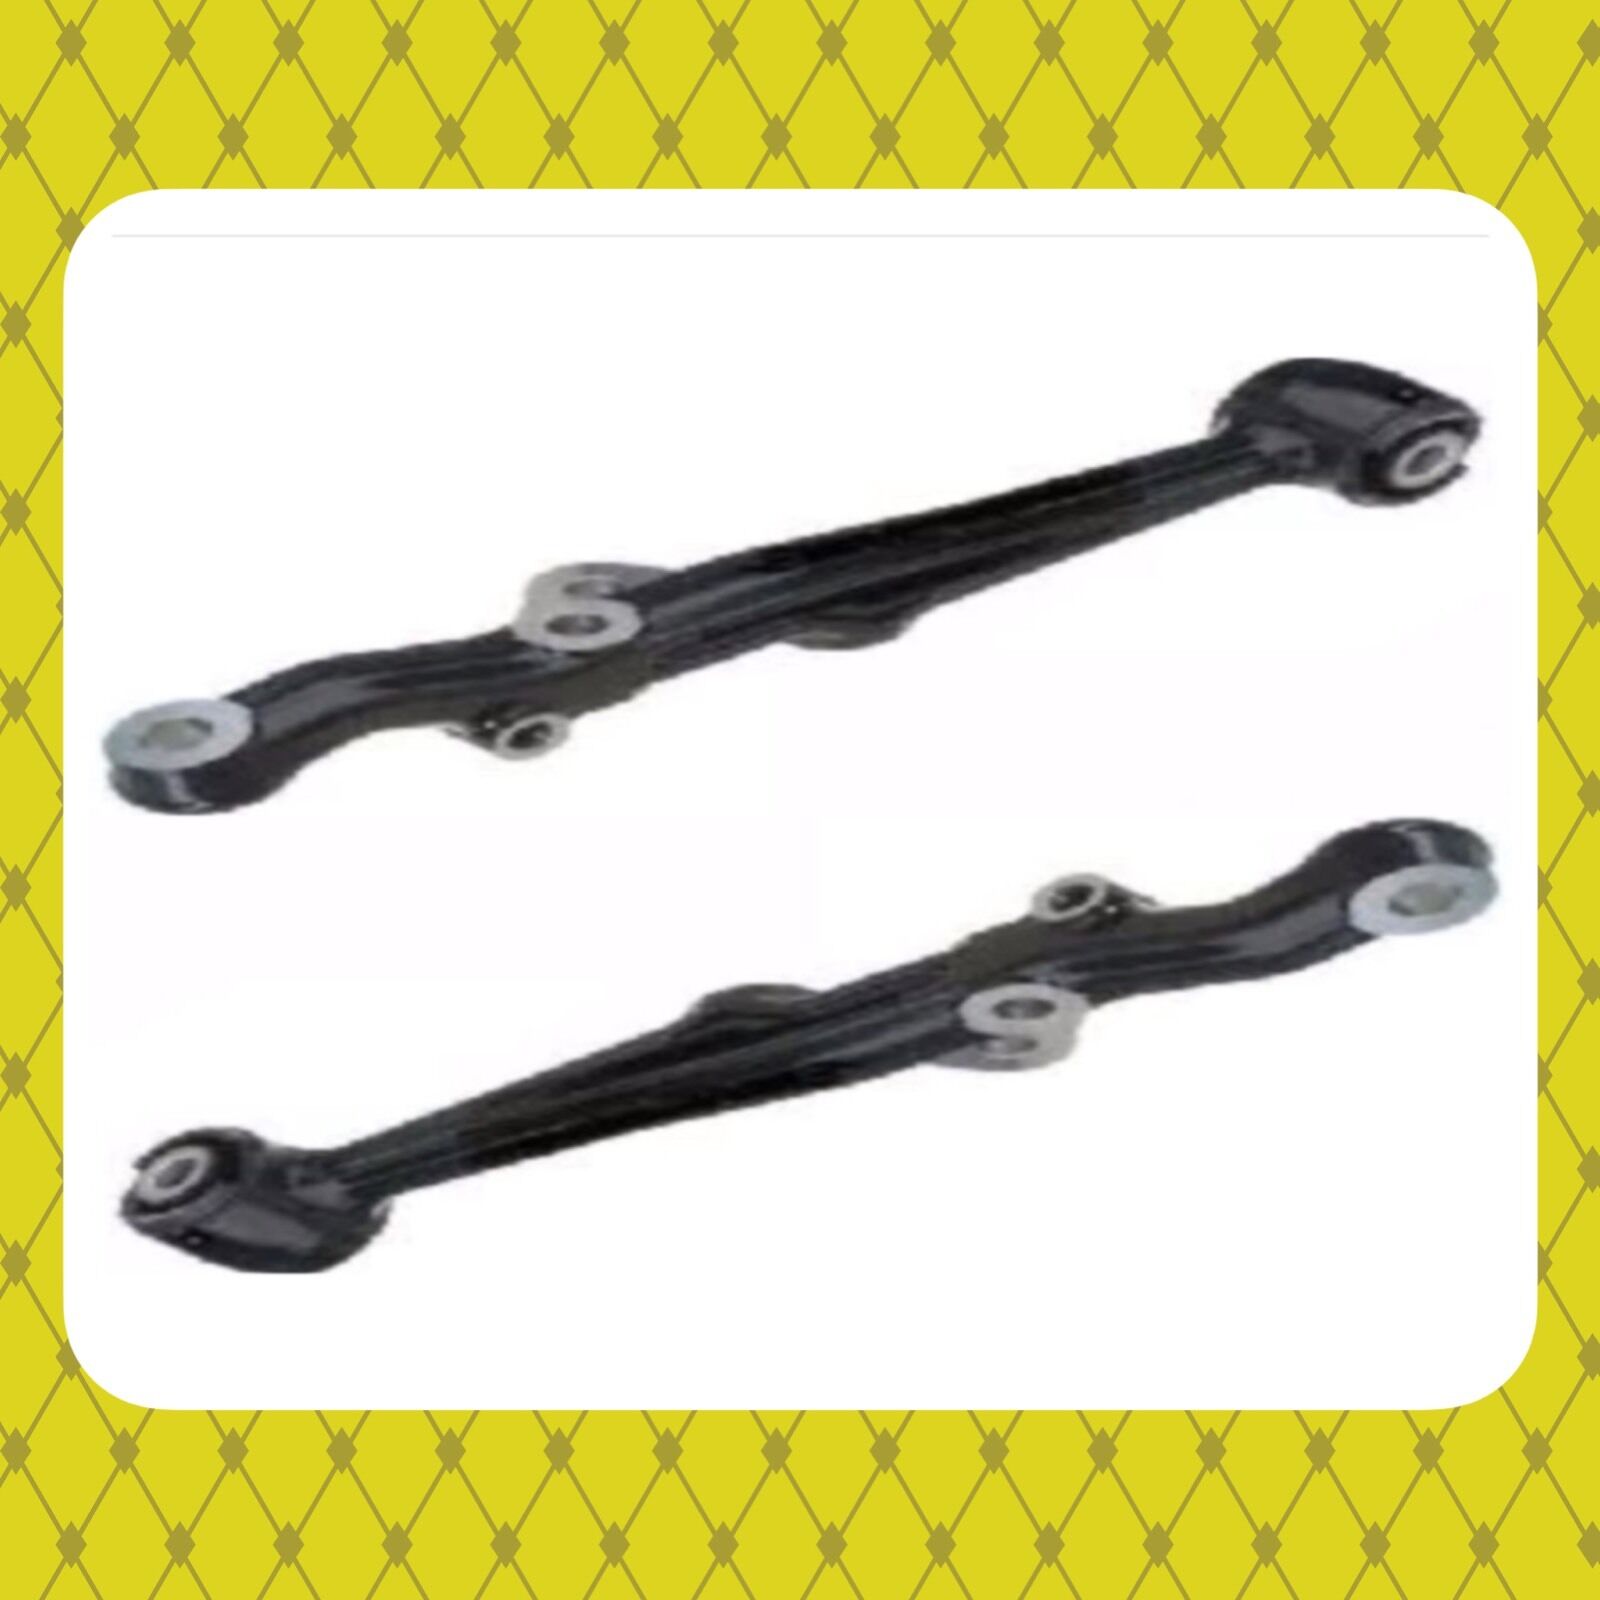 FRONT LOWER CONTROL ARM FOR 1995-2000 LEXUS LS400 PAIR FAST SHIPPING & RECEIVE